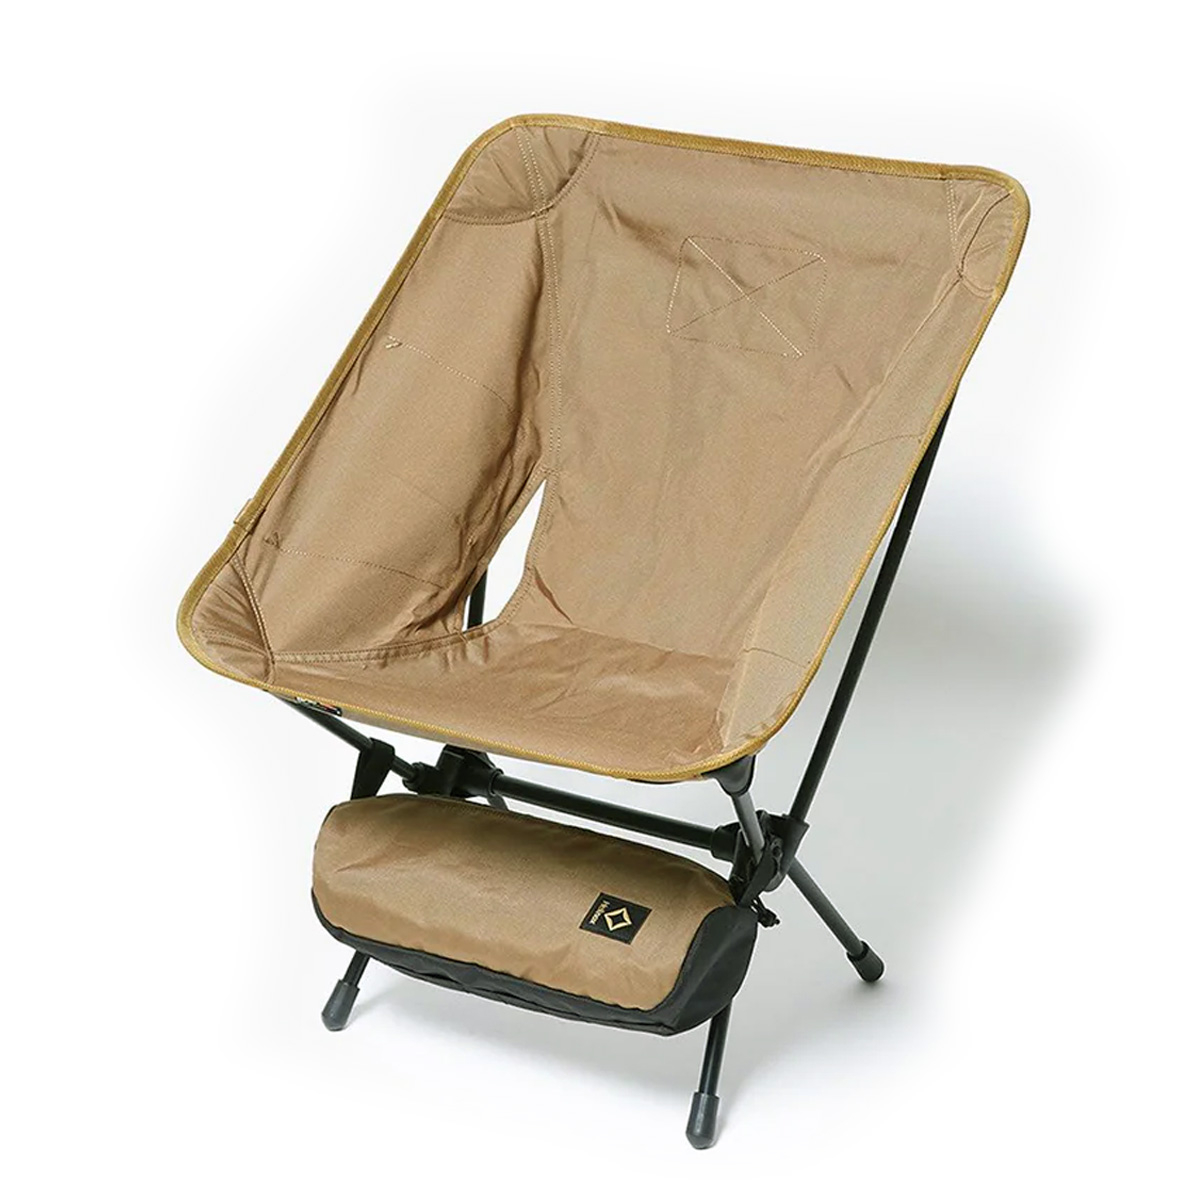 Helinox Tactical Chair One Coyote Tan, tragbarer, faltbarer, leichter Campingstuhl